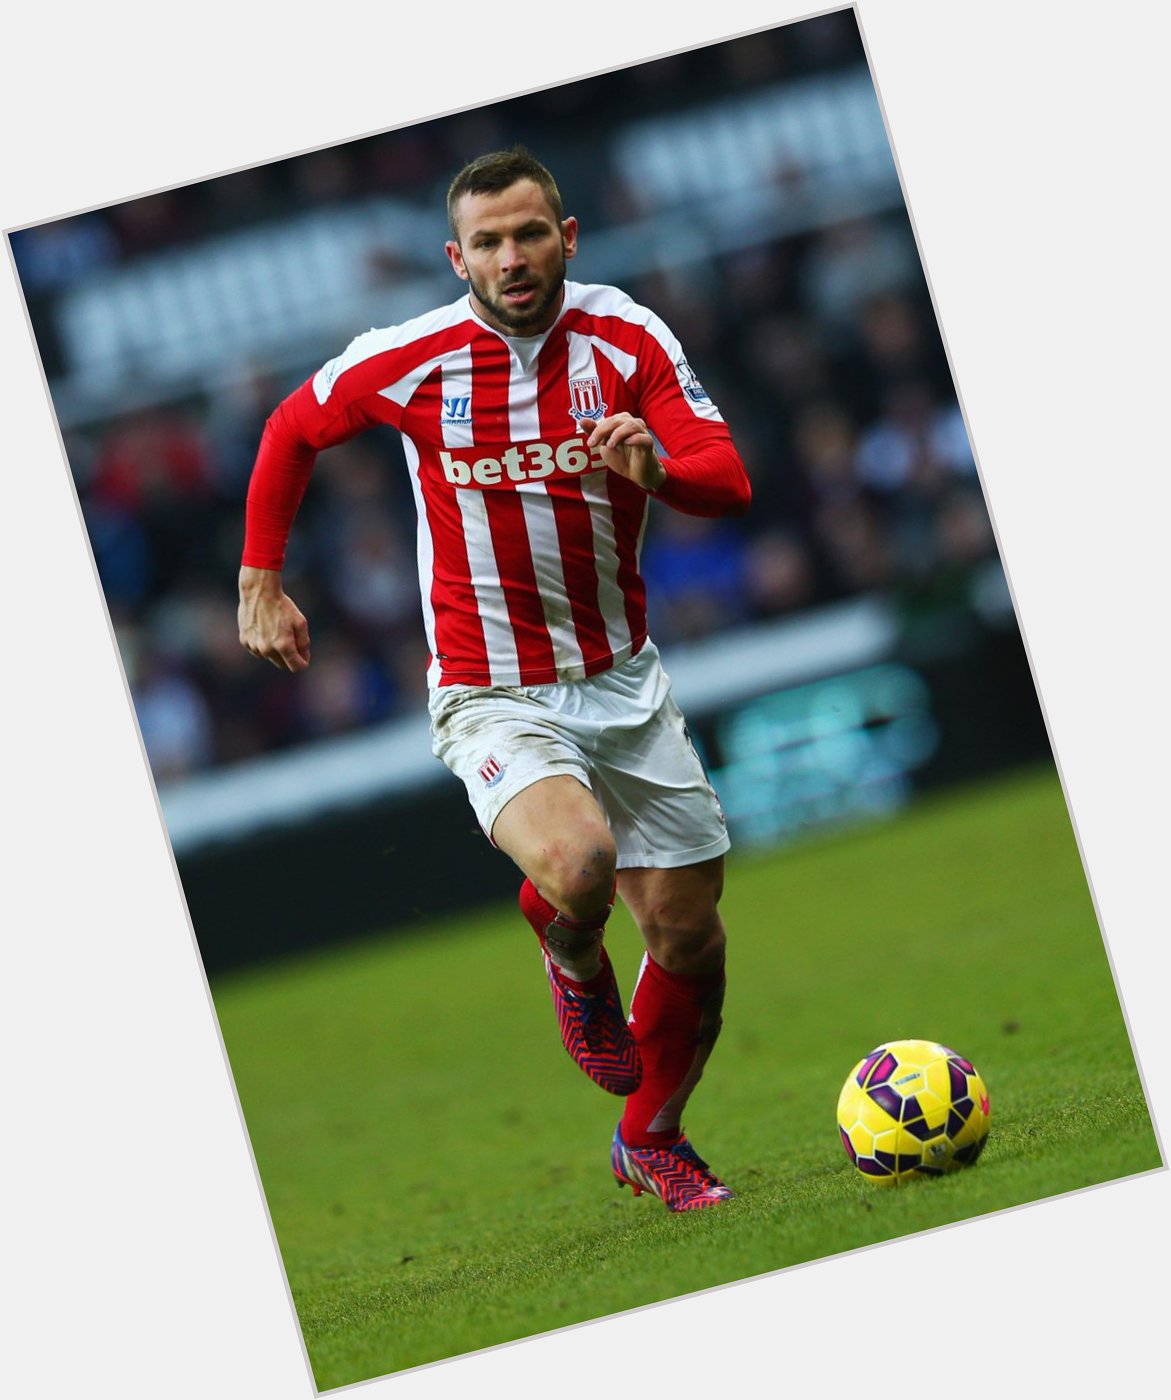 Happy birthday to Stoke defender Phil Bardsley... he\s a real knockout!

Just ask Wayne Rooney! 